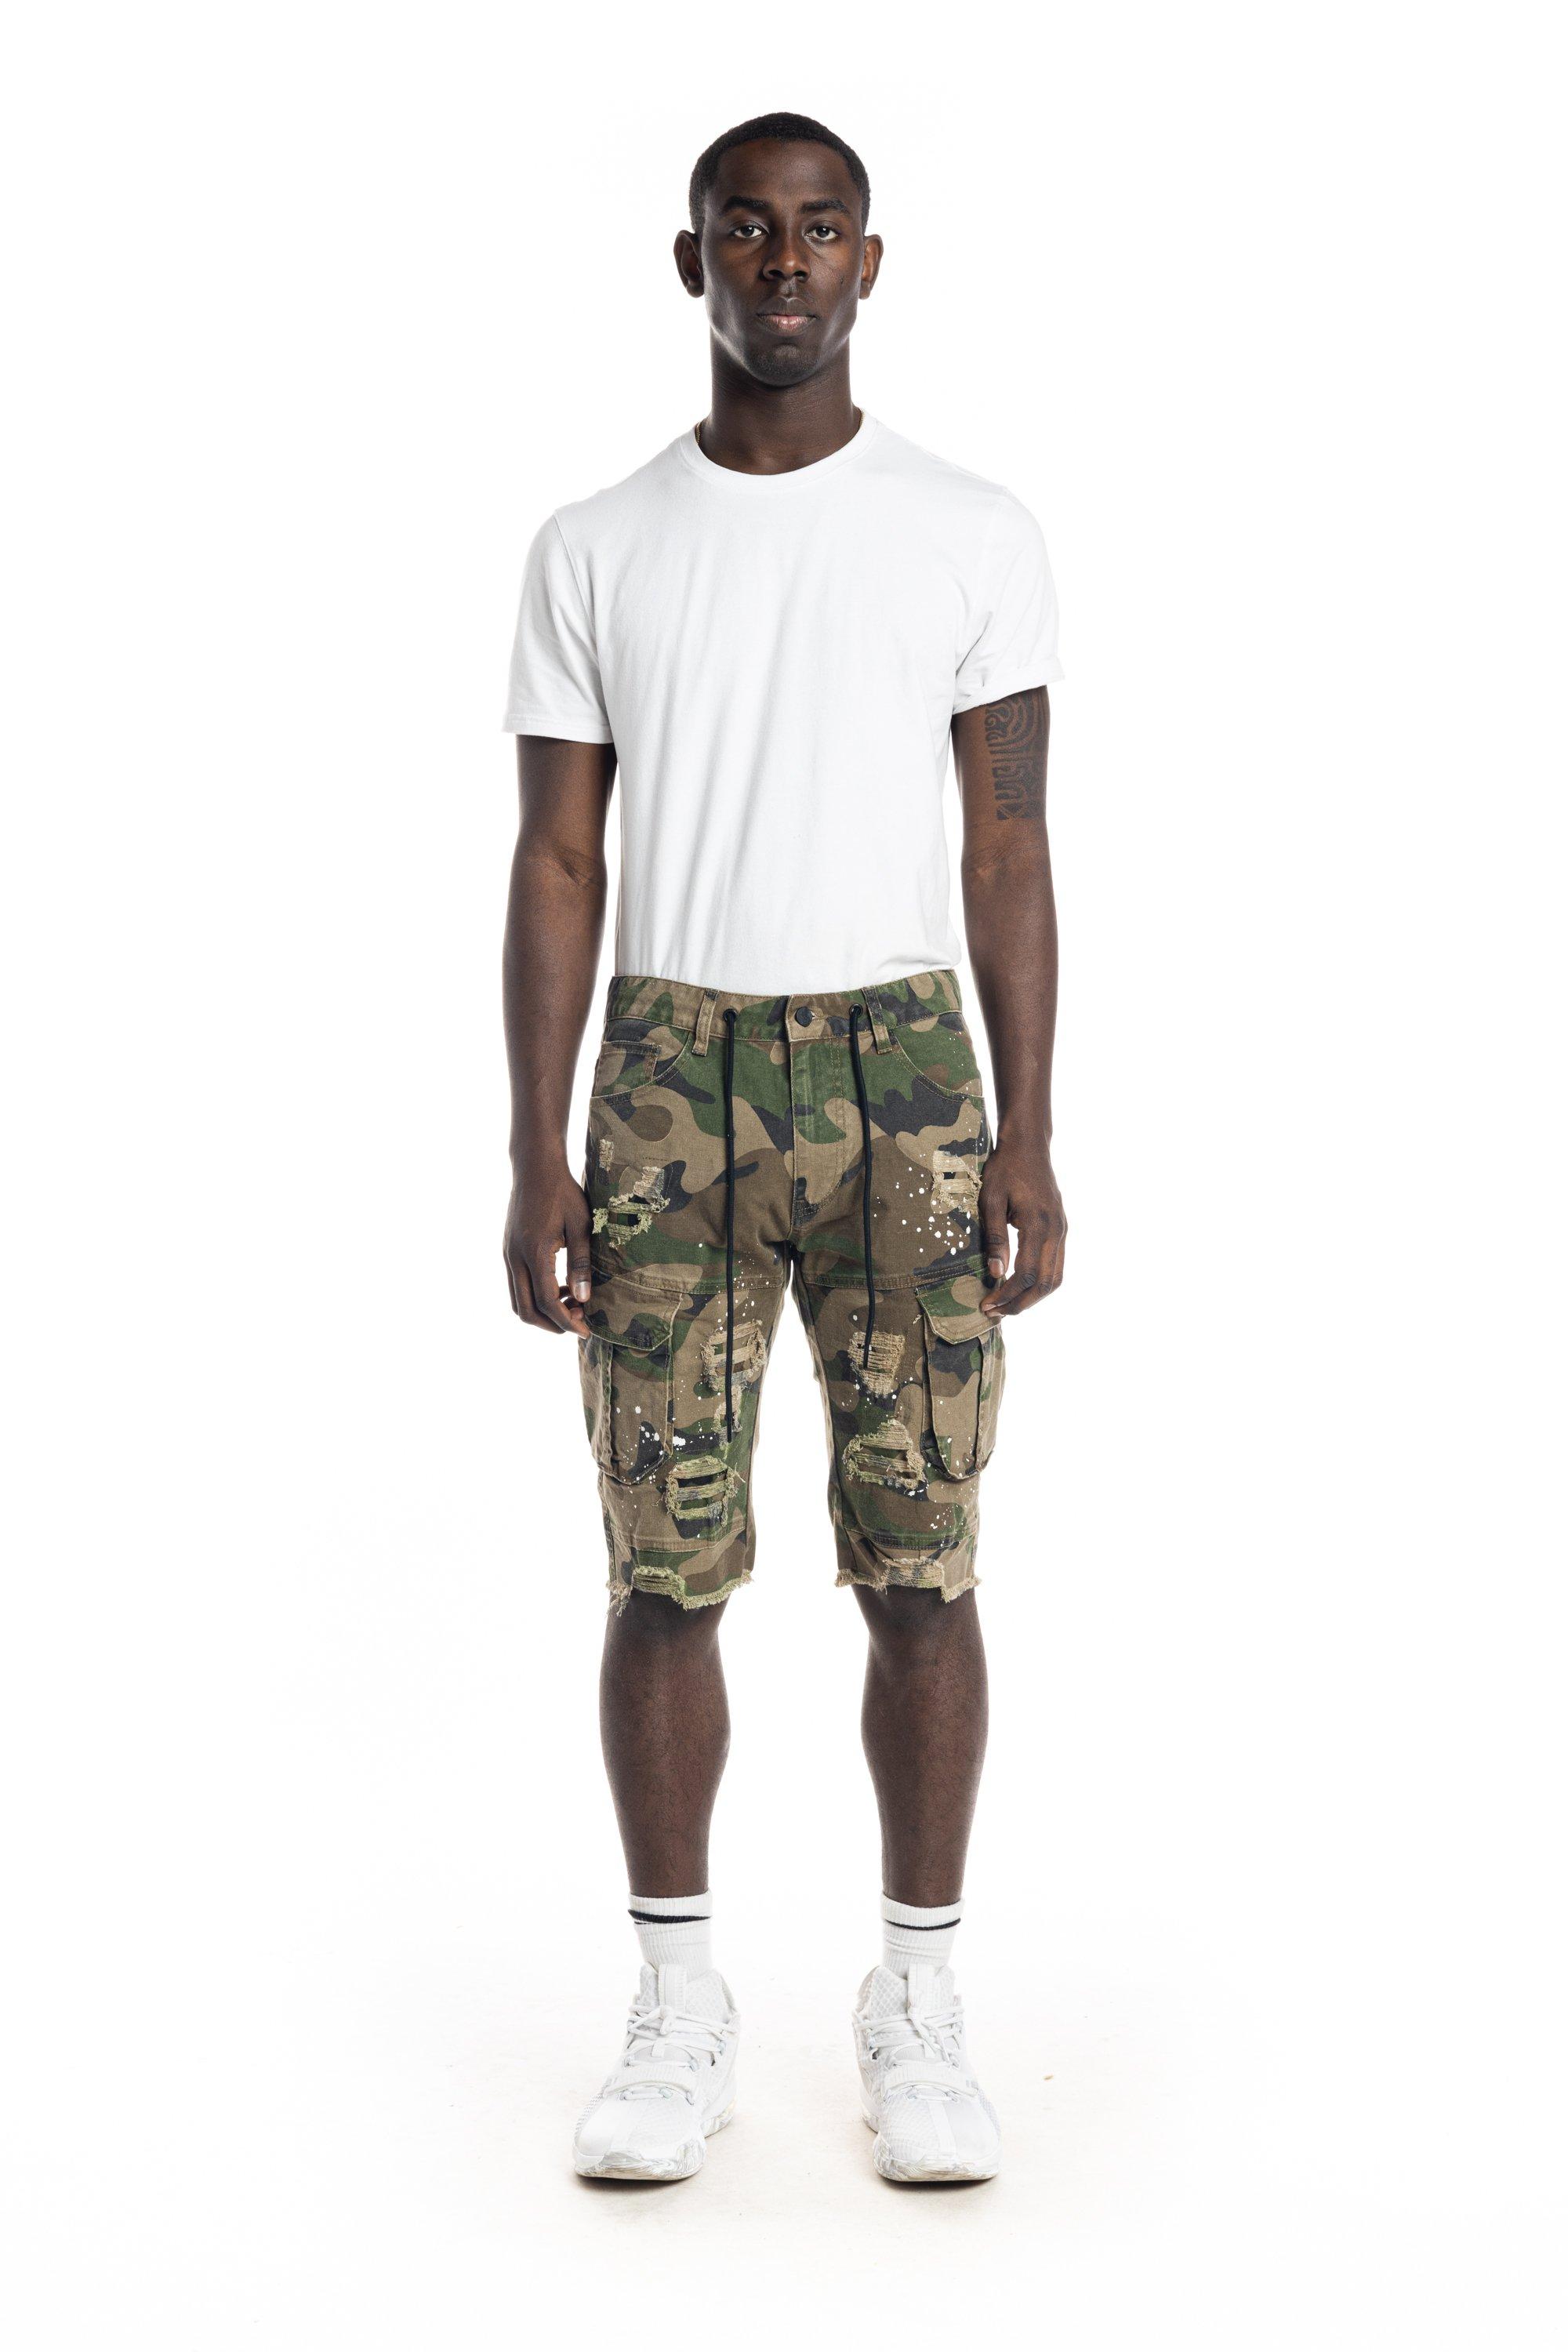 Grindhouse Men's Cargo Ripped Twill Shorts - Camo